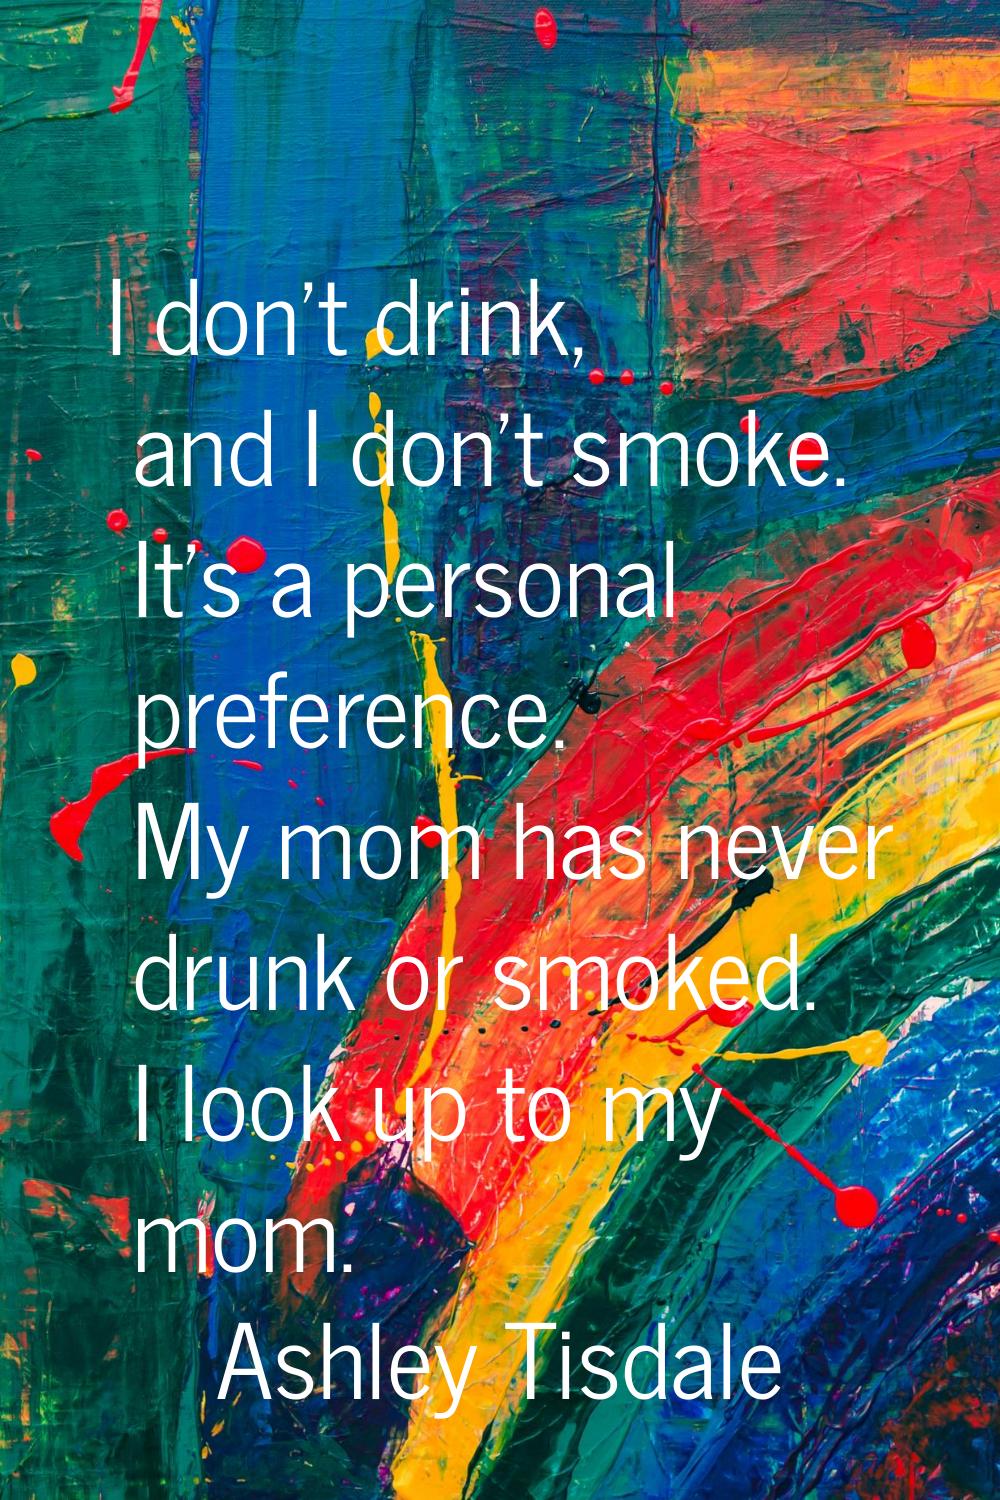 I don't drink, and I don't smoke. It's a personal preference. My mom has never drunk or smoked. I l